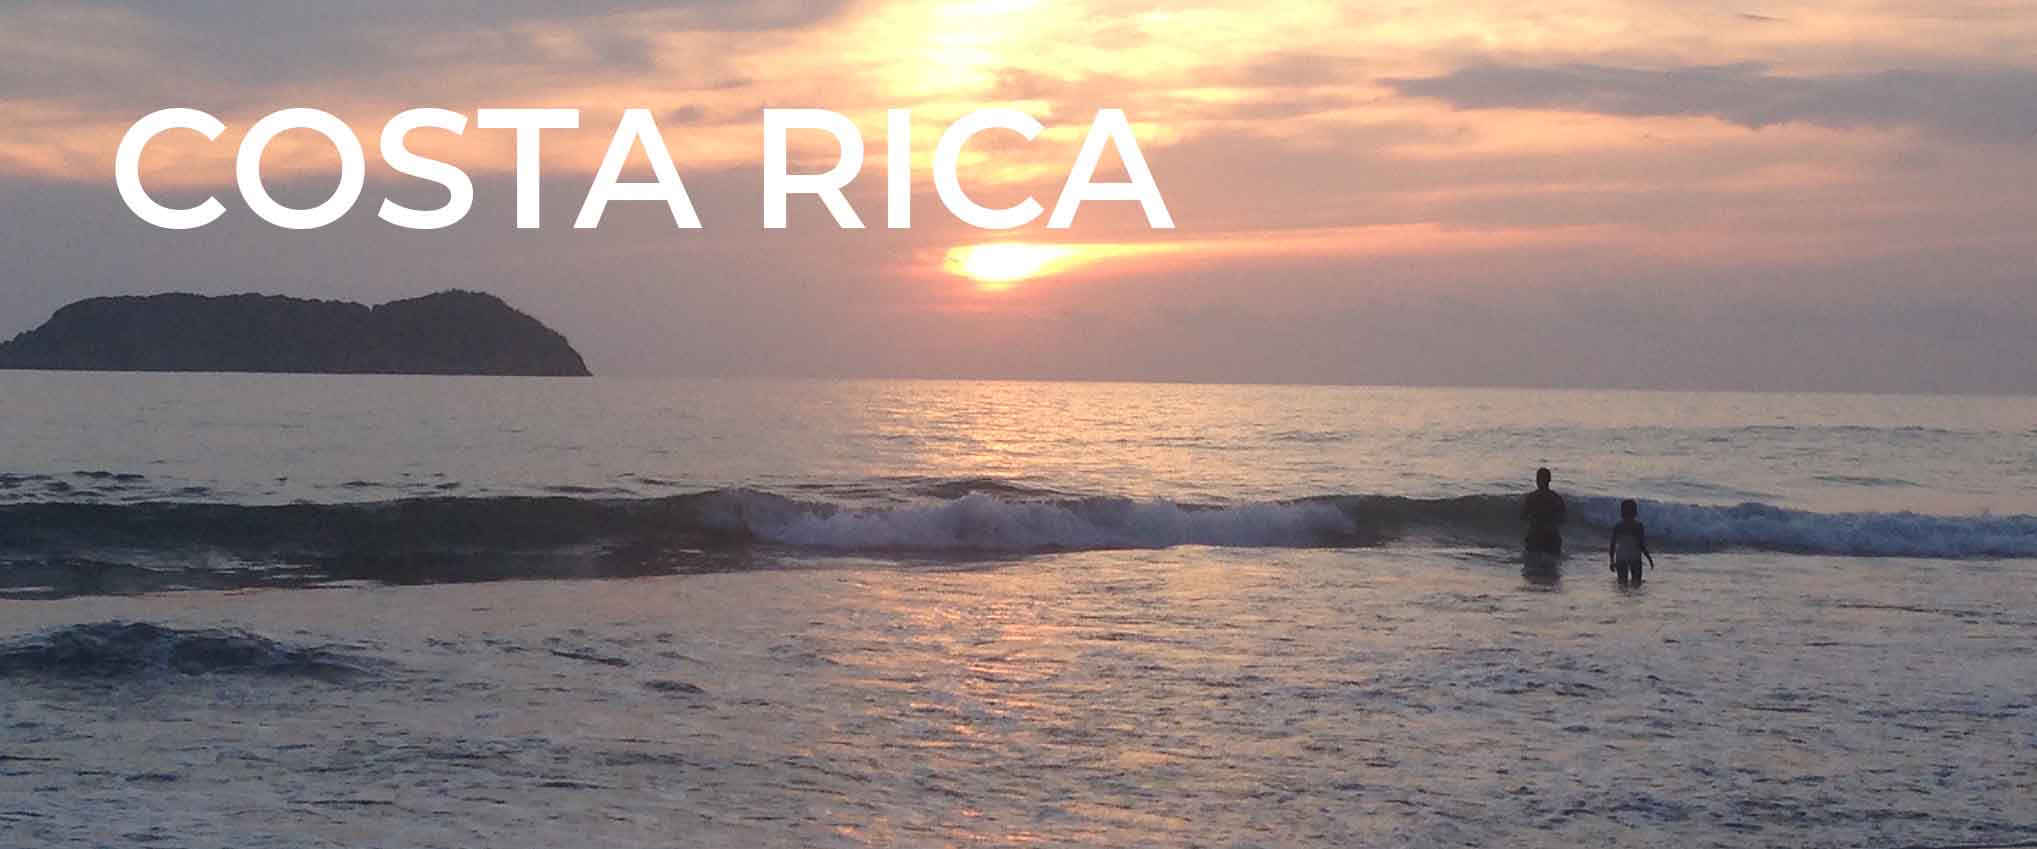 Costa Rica-page-banner